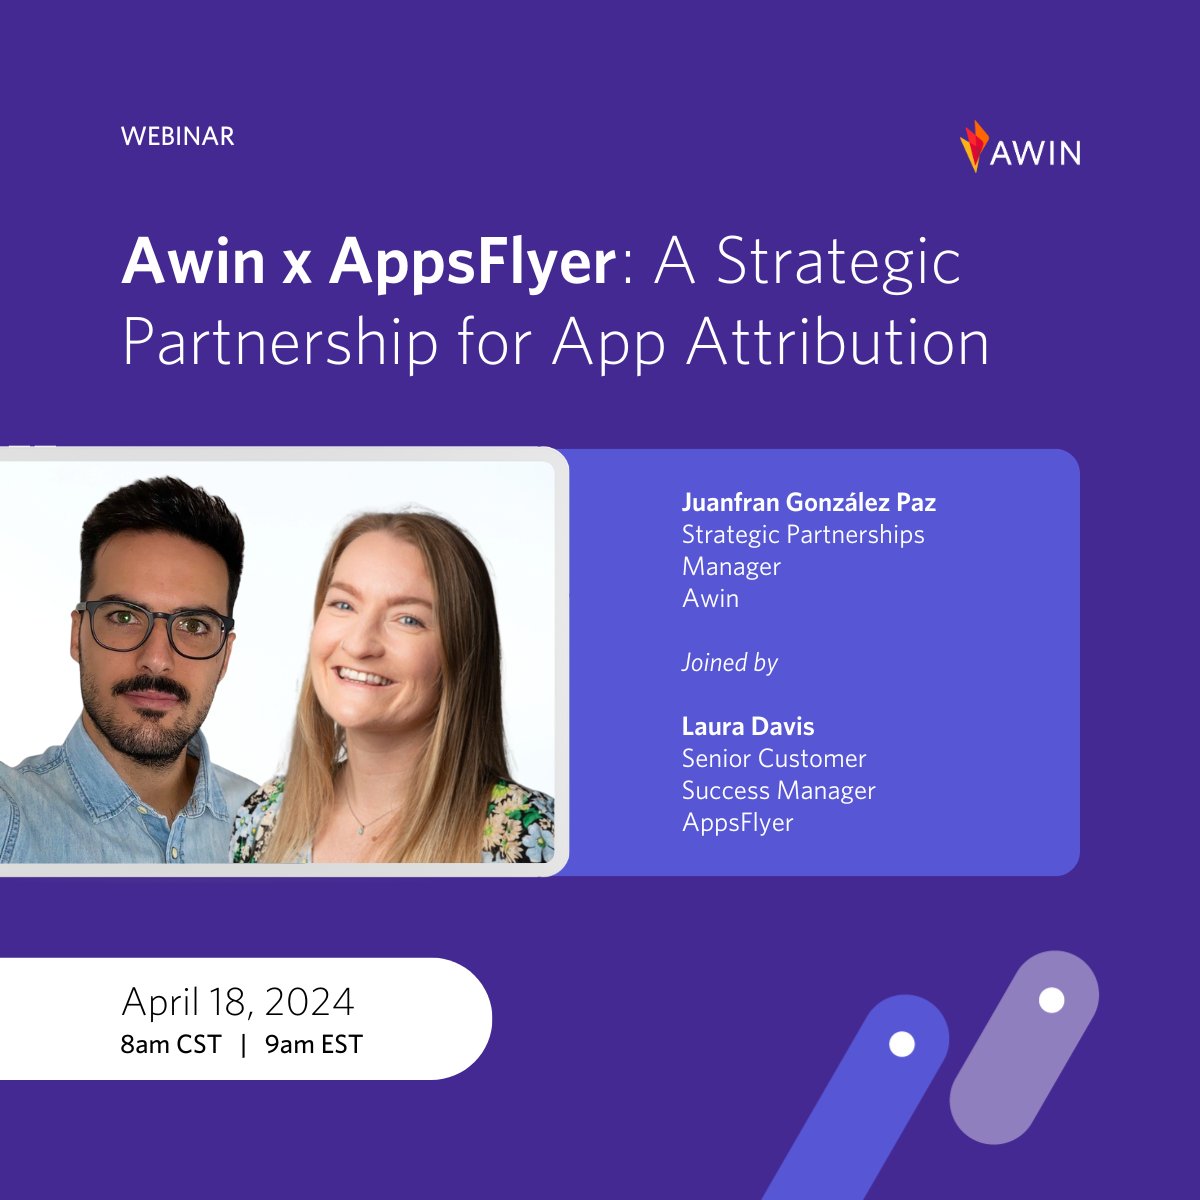 Exciting news! 🎉 Join us for a #webinar with @AppsFlyer on April 18 at 9am EST. We'll be discussing the #StrategicPartnership between #Awin and #AppsFlyer, focusing on #AppAttribution and #IndustryTrends. Register now 👉 awin.link/appsflyer-webi…